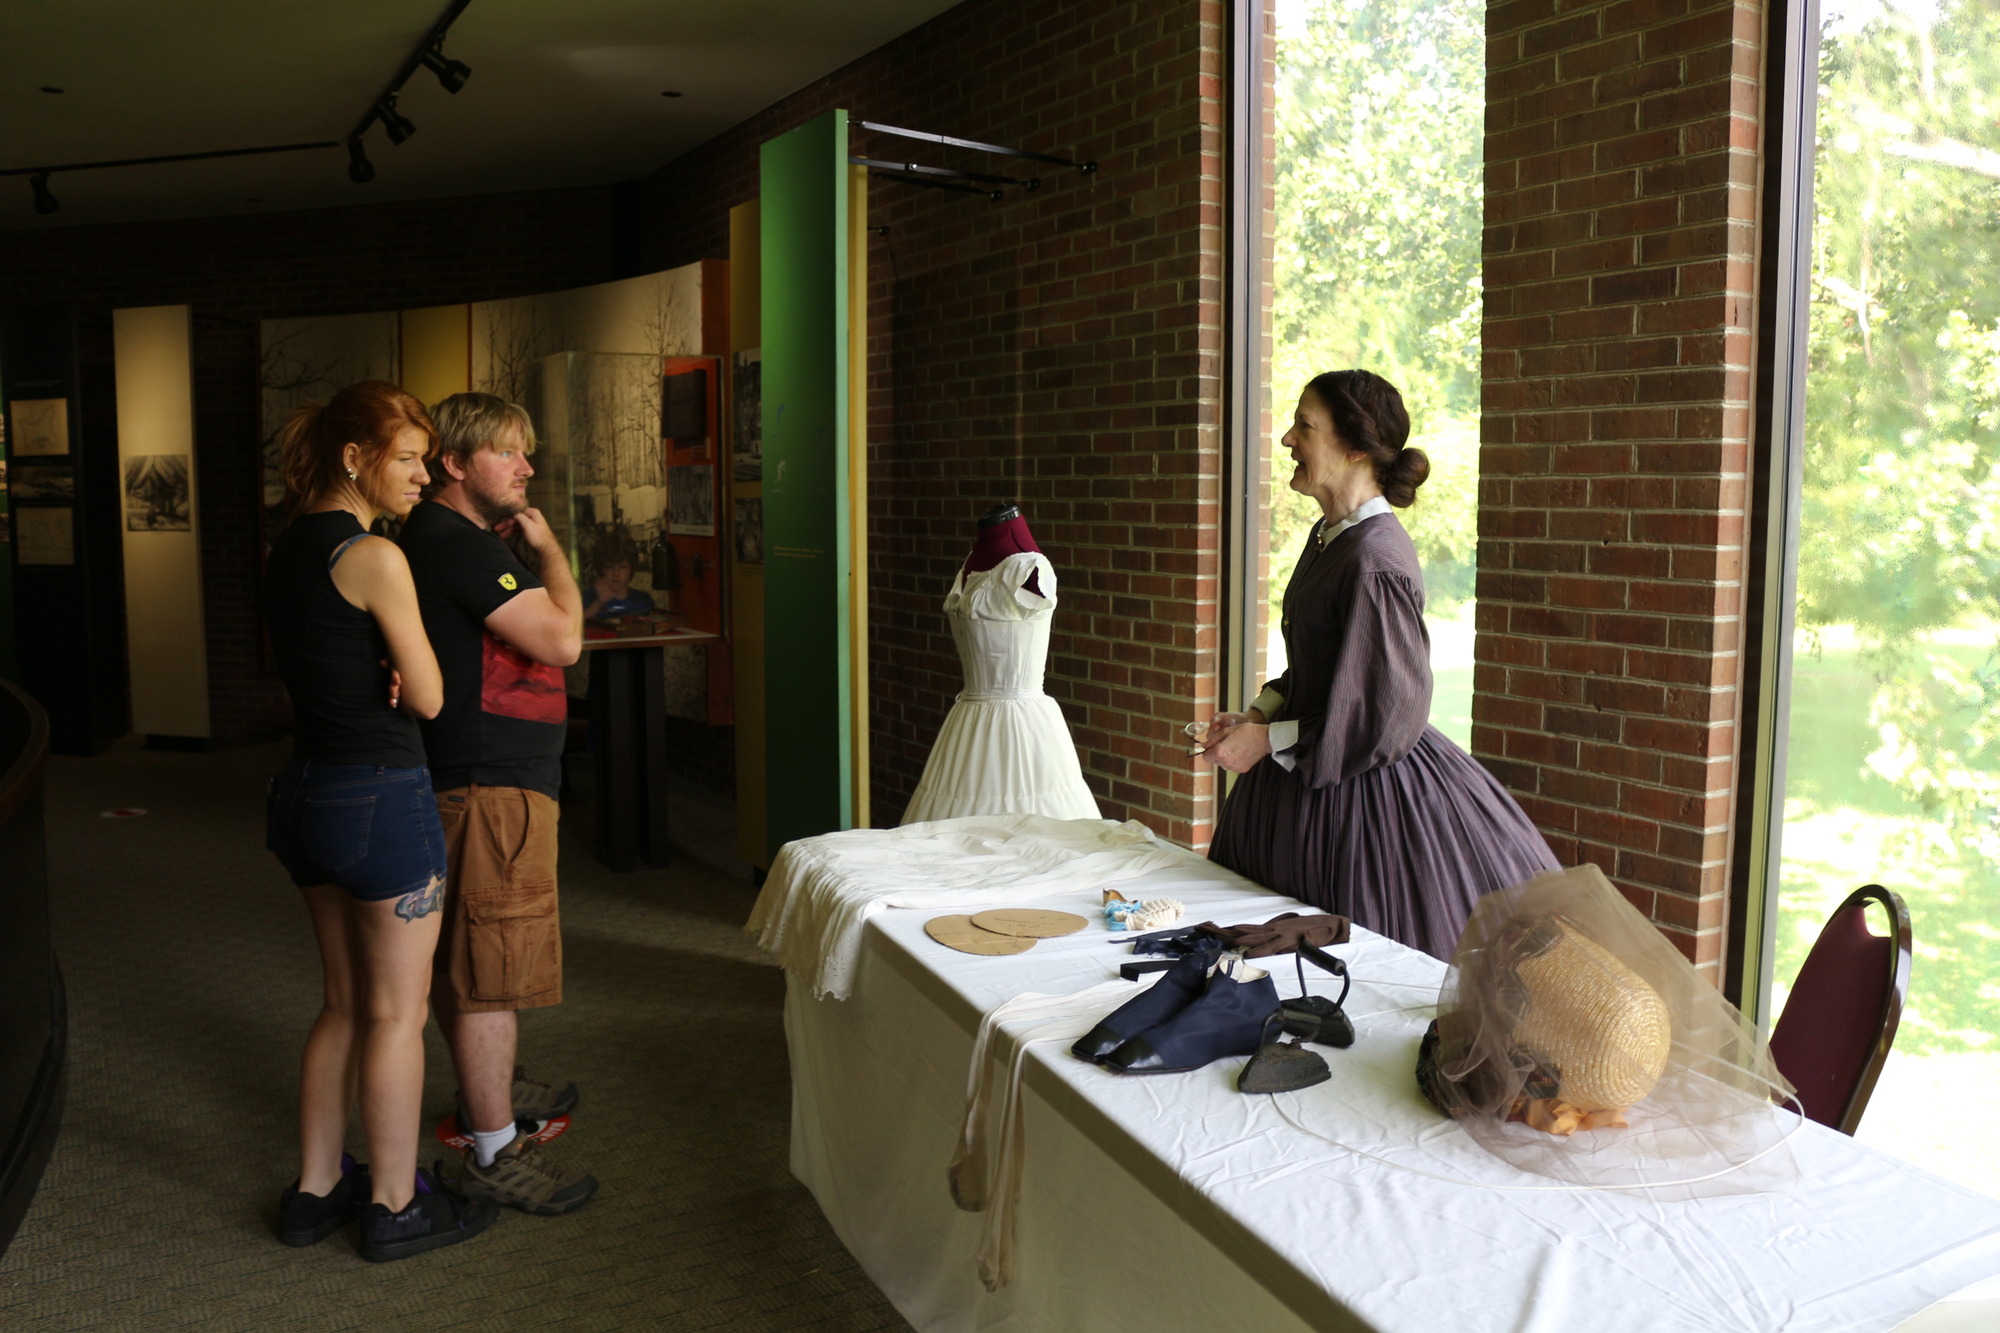 A man and woman look at a display of historic women’s undergarments while listening to a woman wearing a pale purple dress with a hoopskirt.